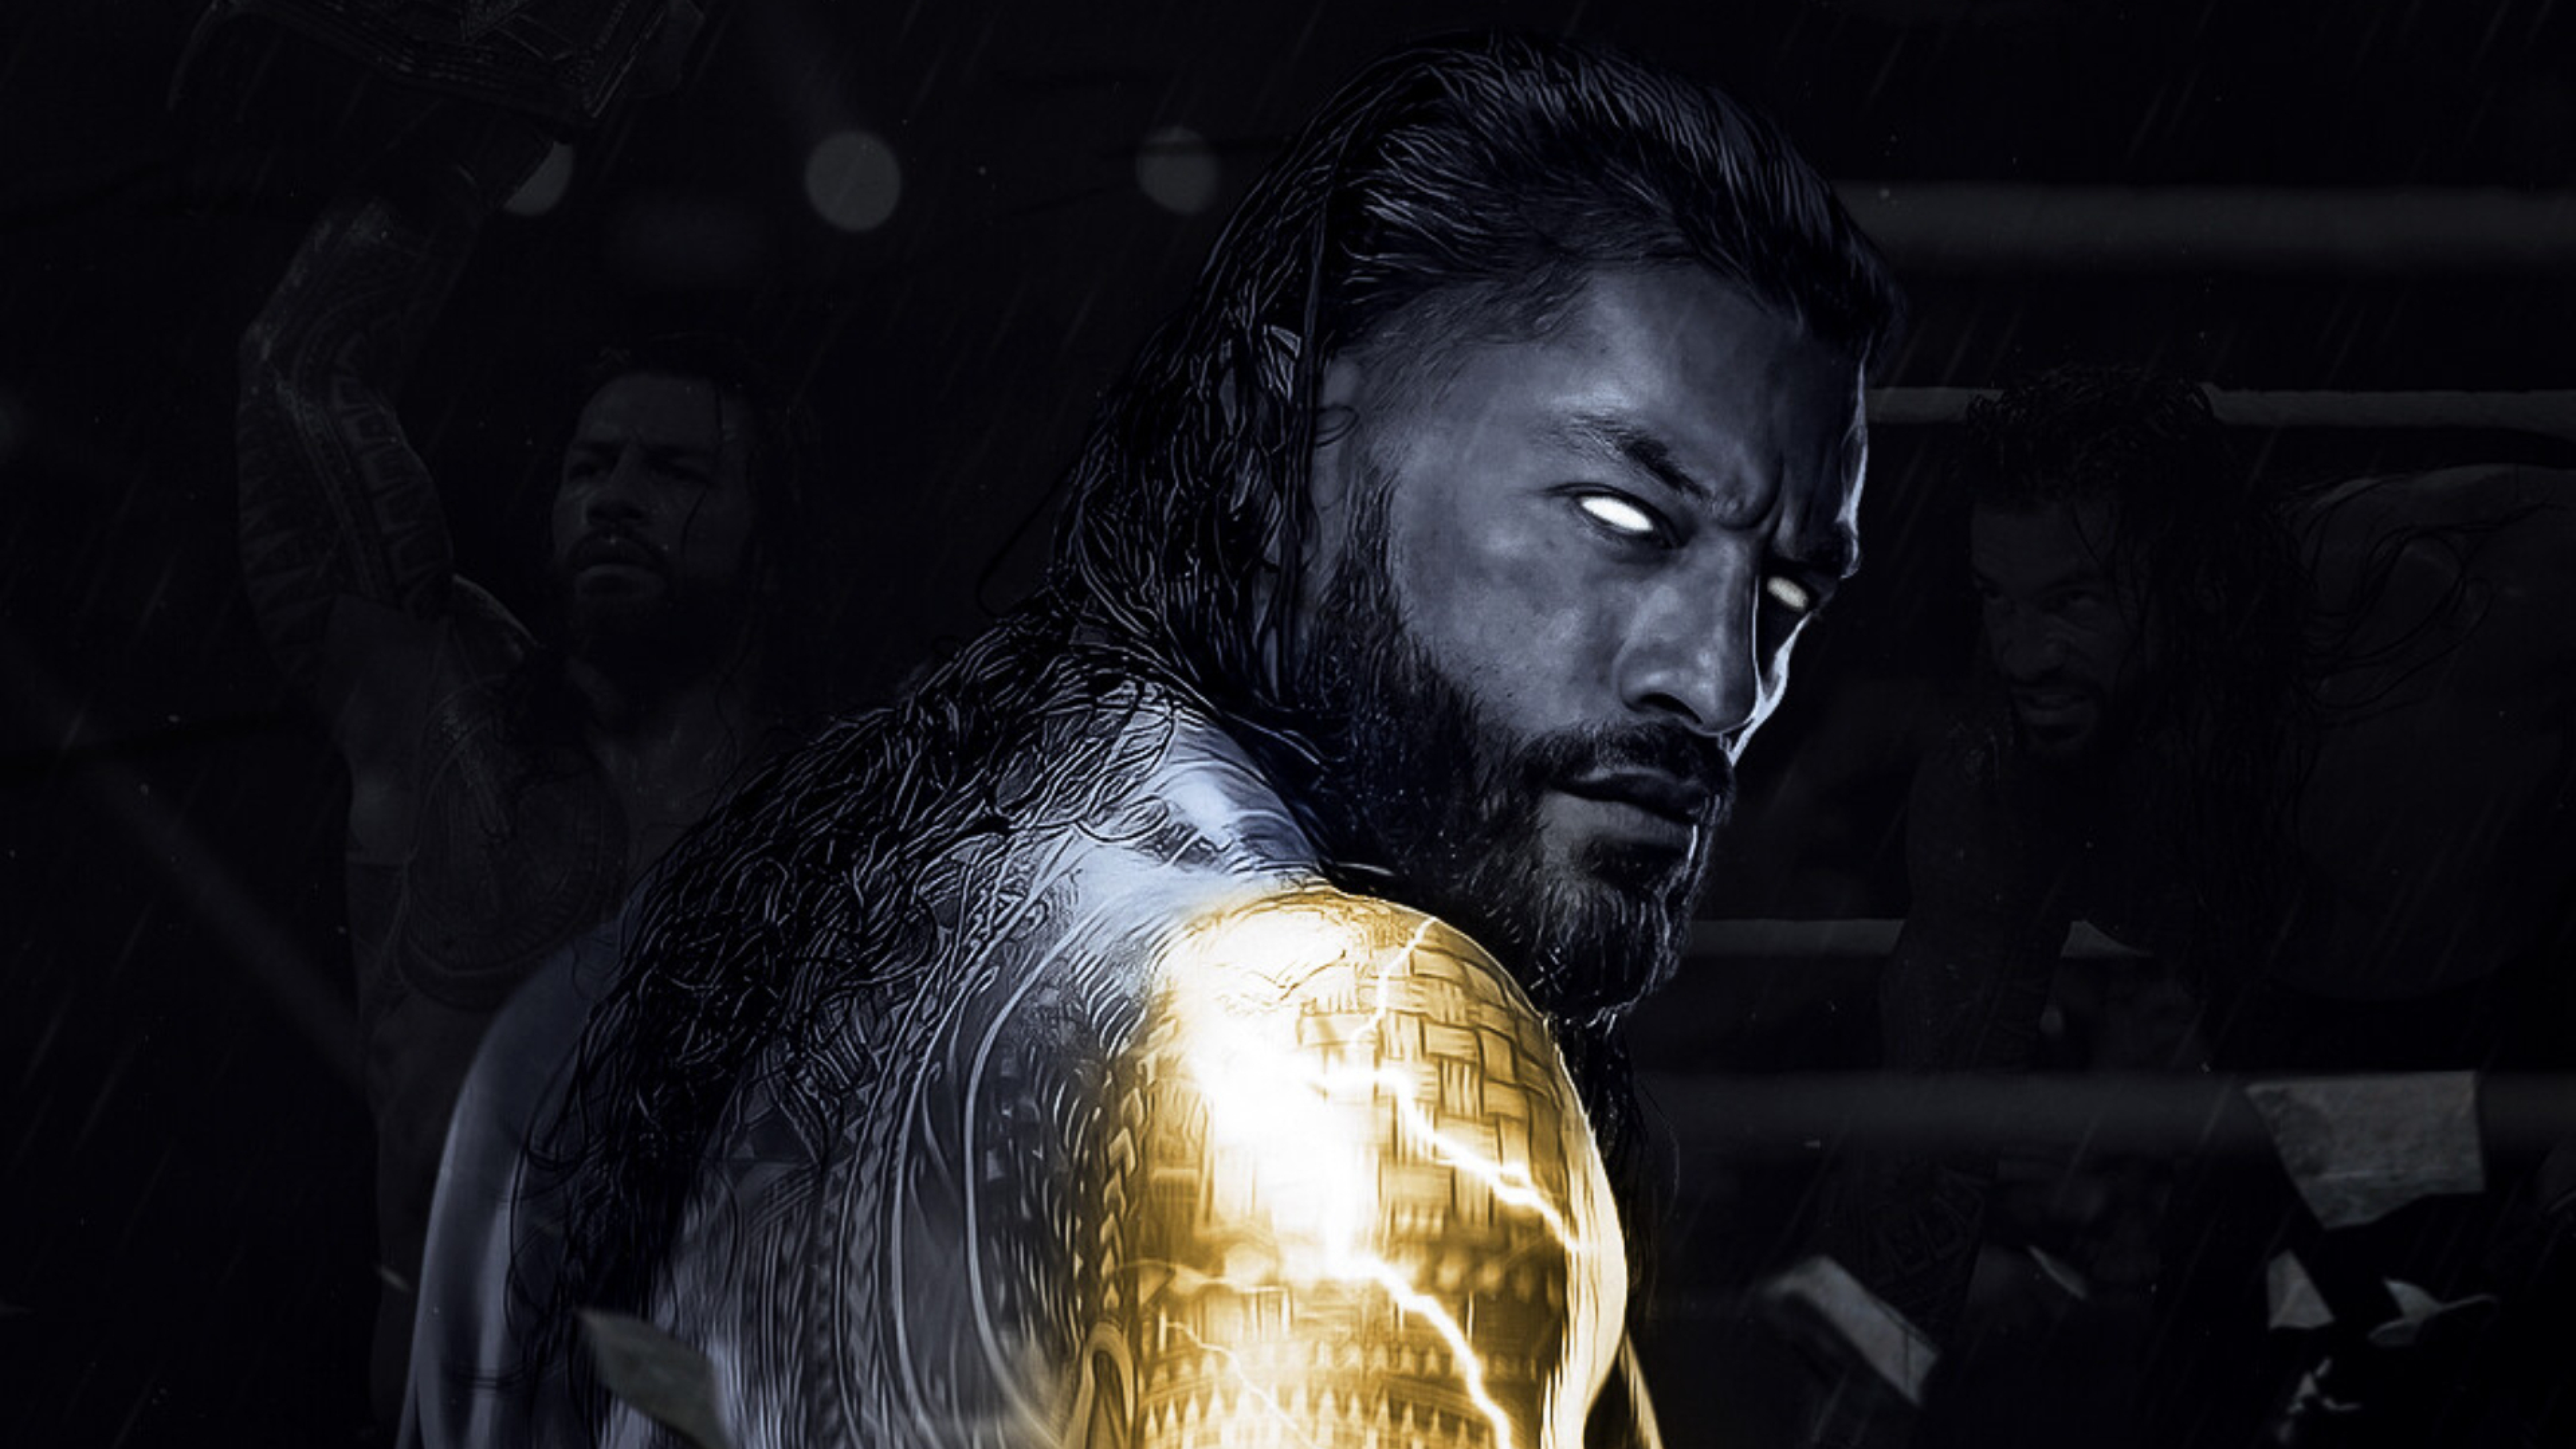 7680x4320 Roman Reigns The Tribal Chief 8K Wallpaper, HD TV Series 4K  Wallpapers, Images, Photos and Background - Wallpapers Den